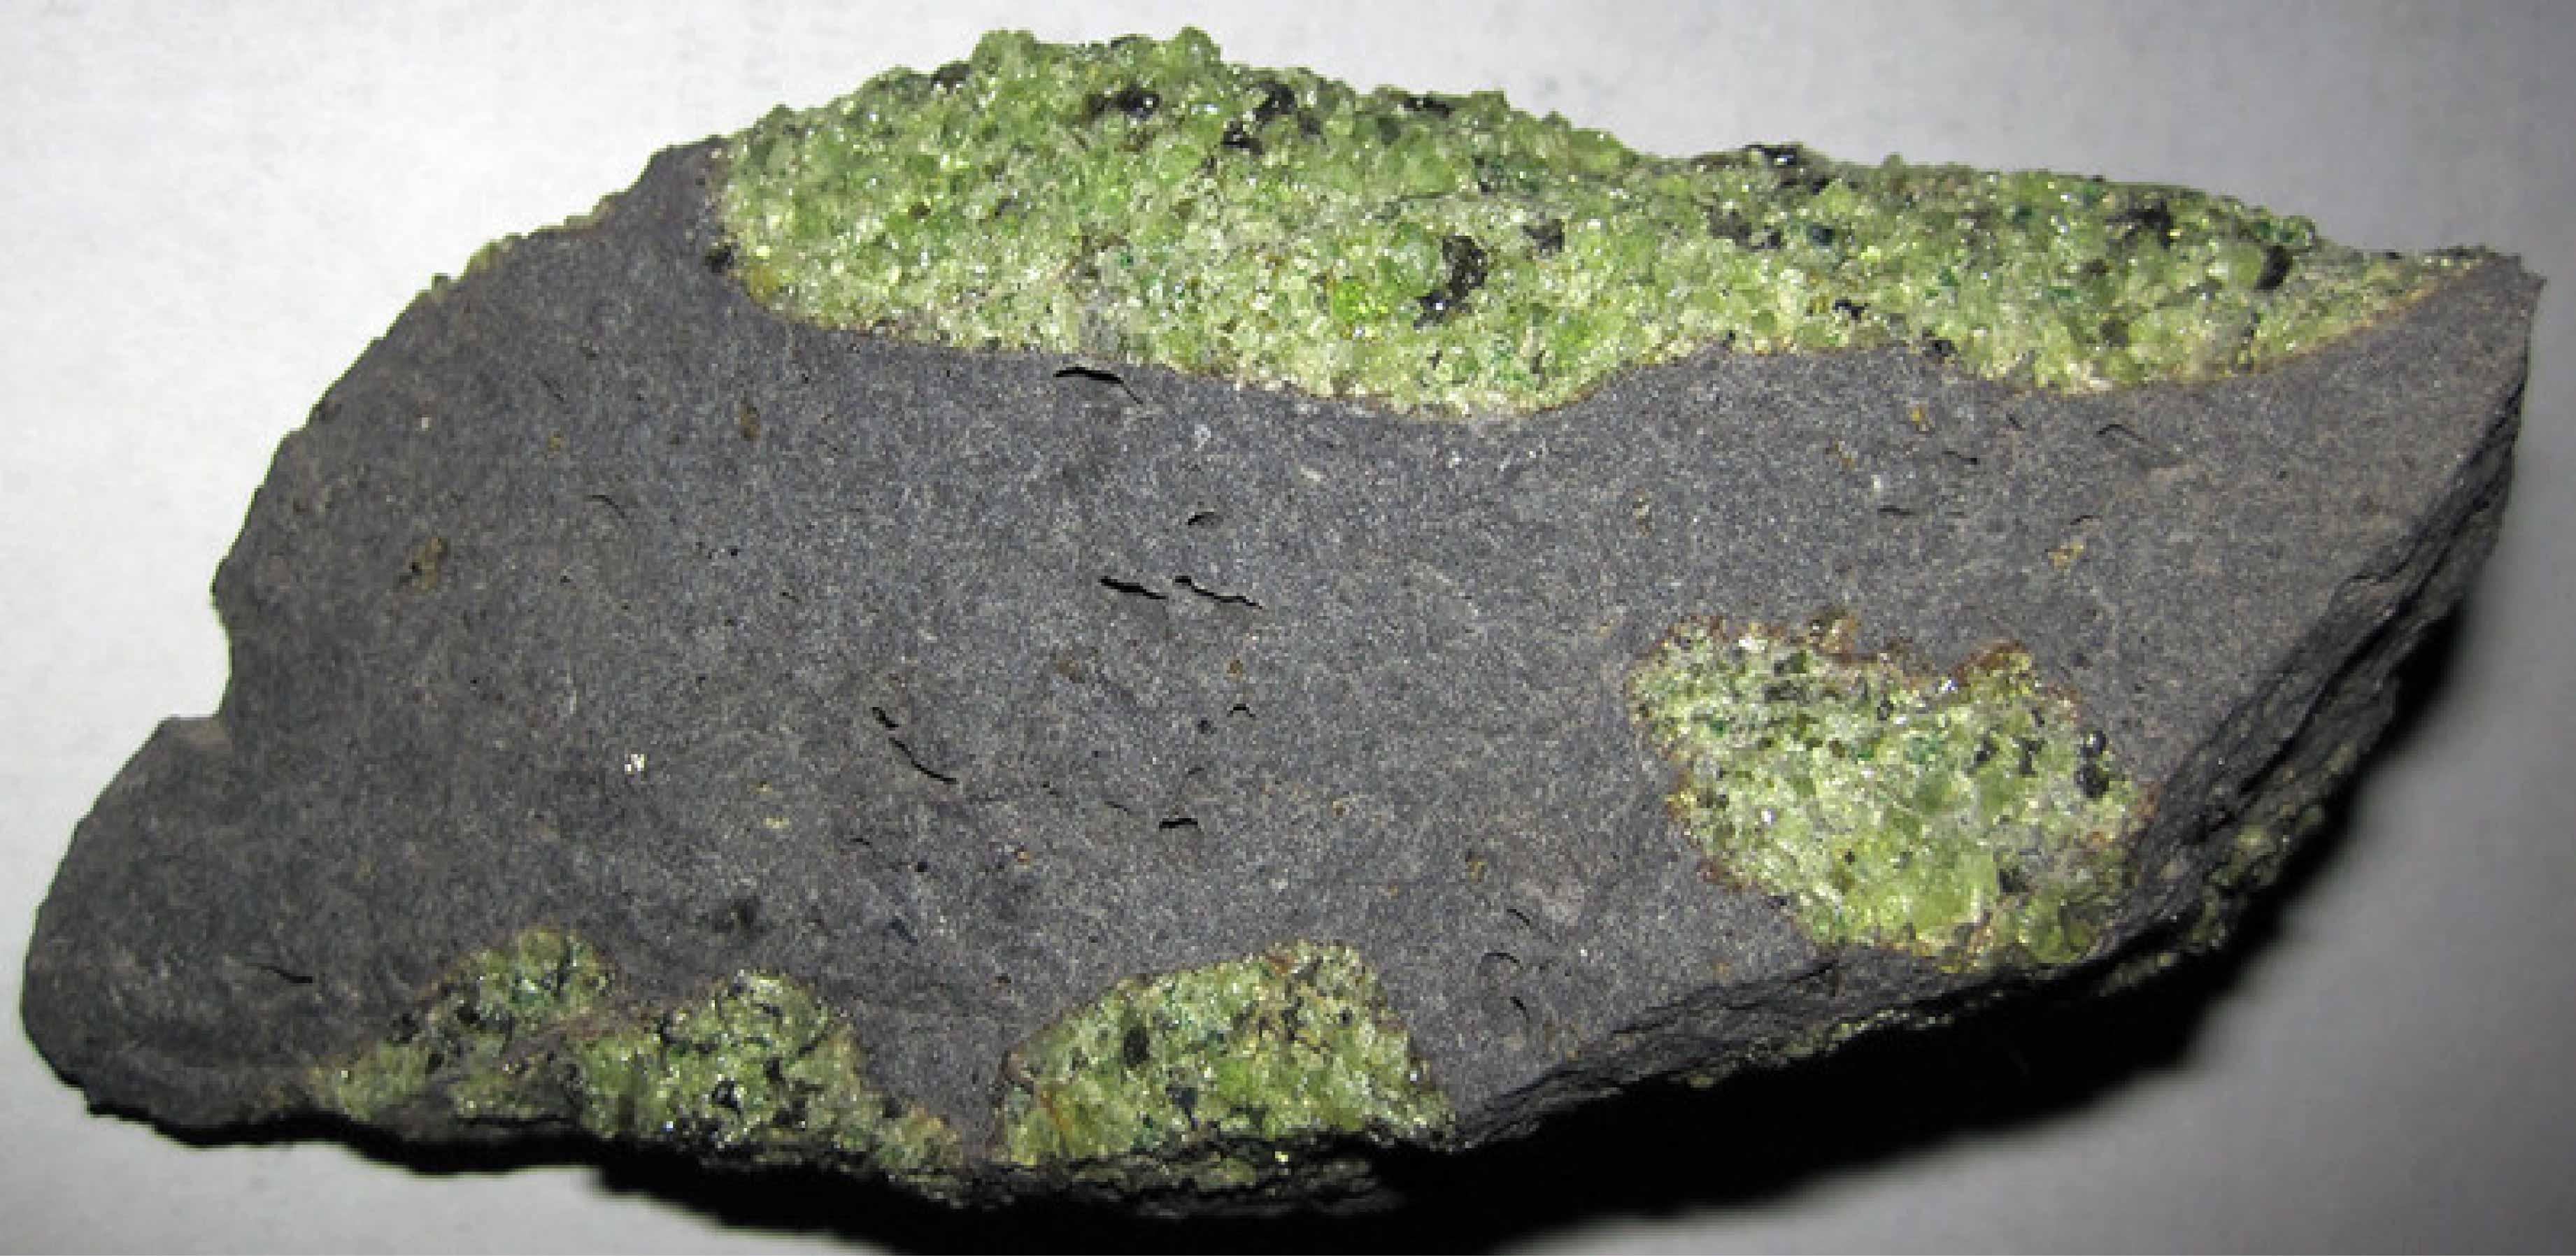 Grey volcanic rock containing exotic green nodule: you can see the pistachio green olivine crystals they are made of